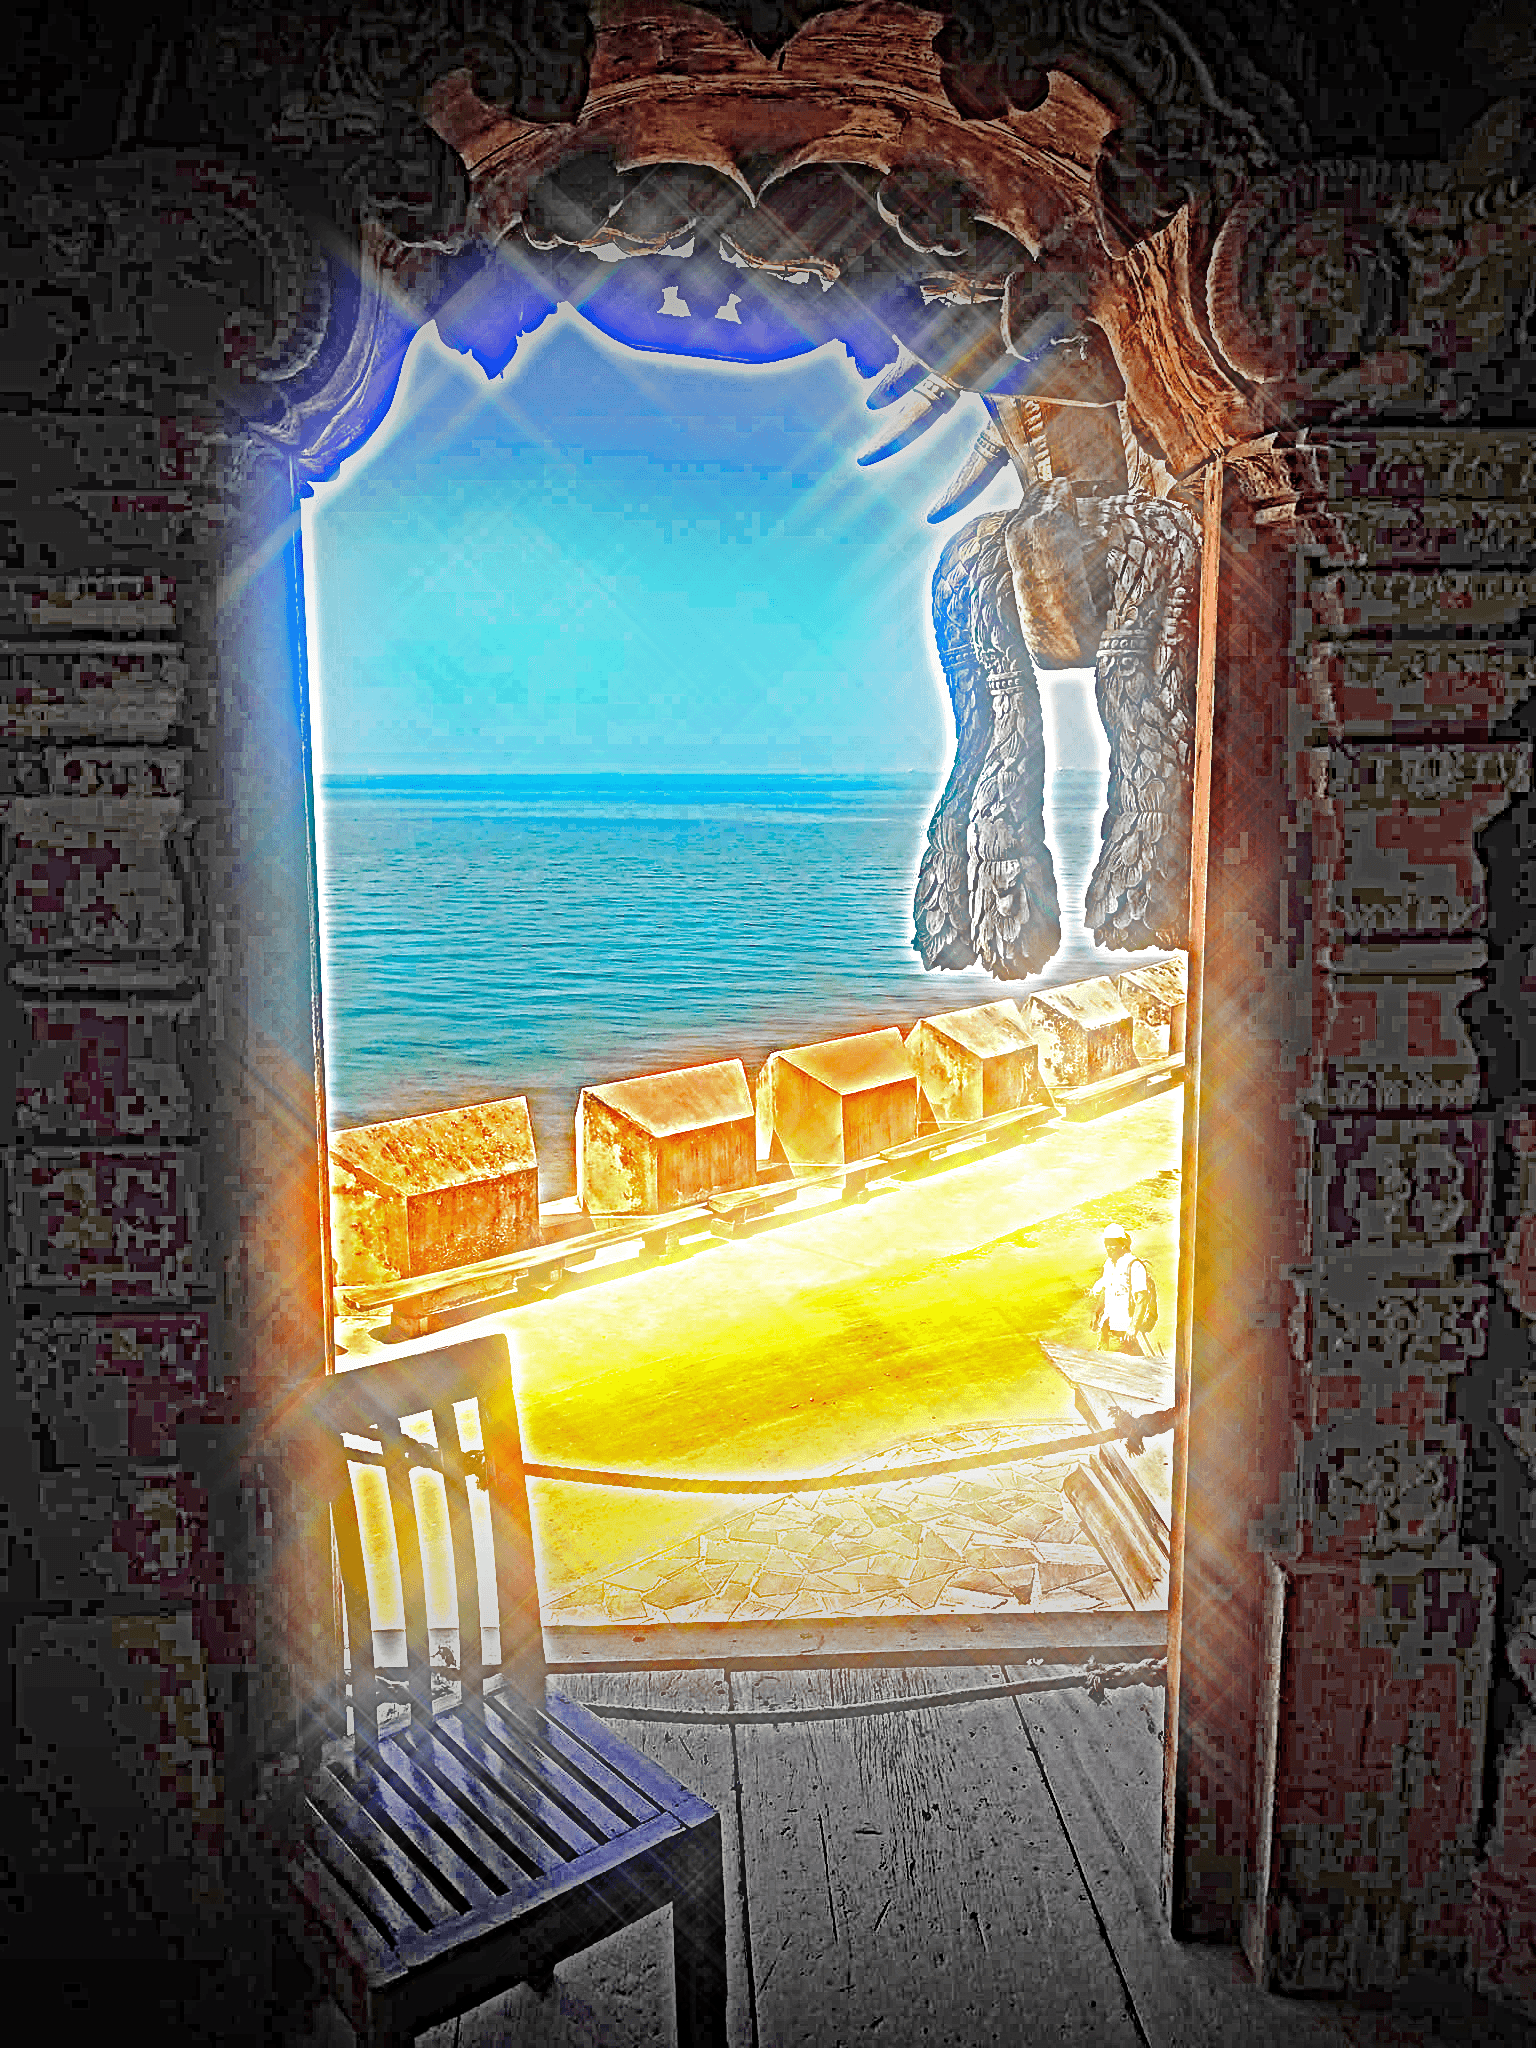 Doorway to the Gulf of Siam